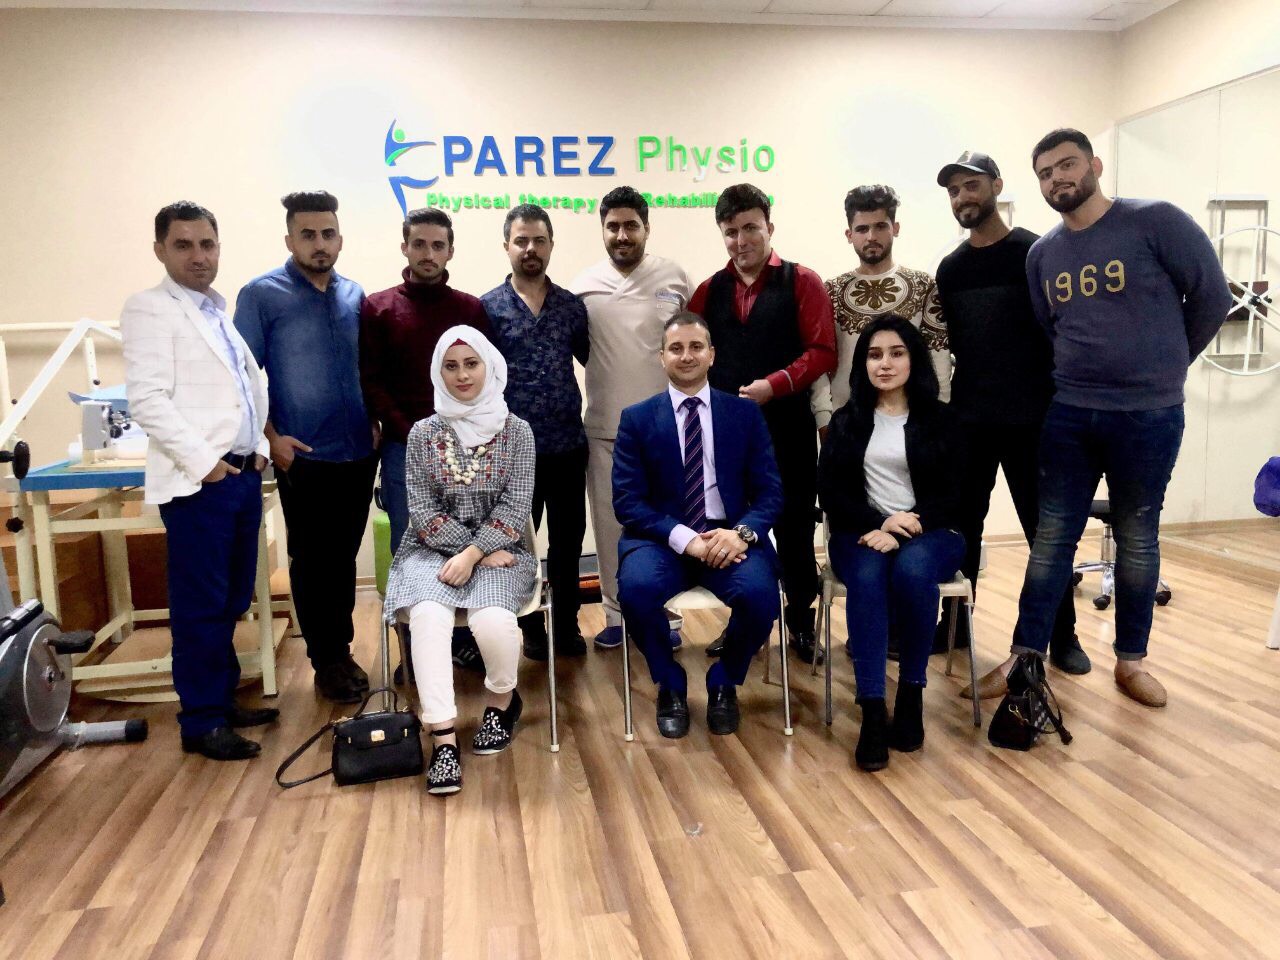 A Visit To The Parez Physio Center For Physiotherapy